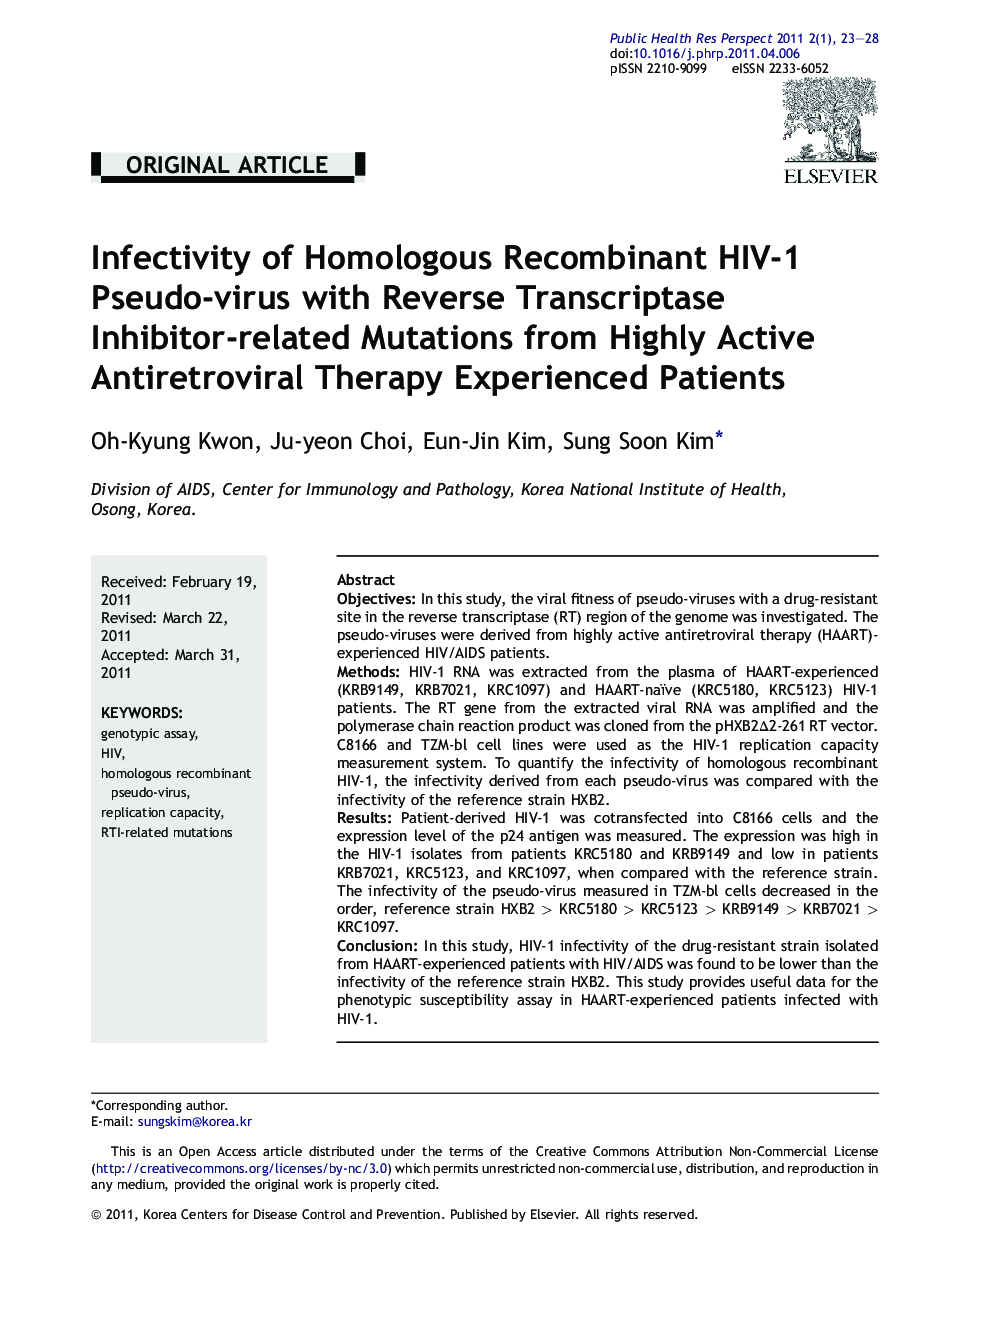 Infectivity of Homologous Recombinant HIV-1 Pseudo-virus with Reverse Transcriptase Inhibitor-related Mutations from Highly Active Antiretroviral Therapy Experienced Patients 